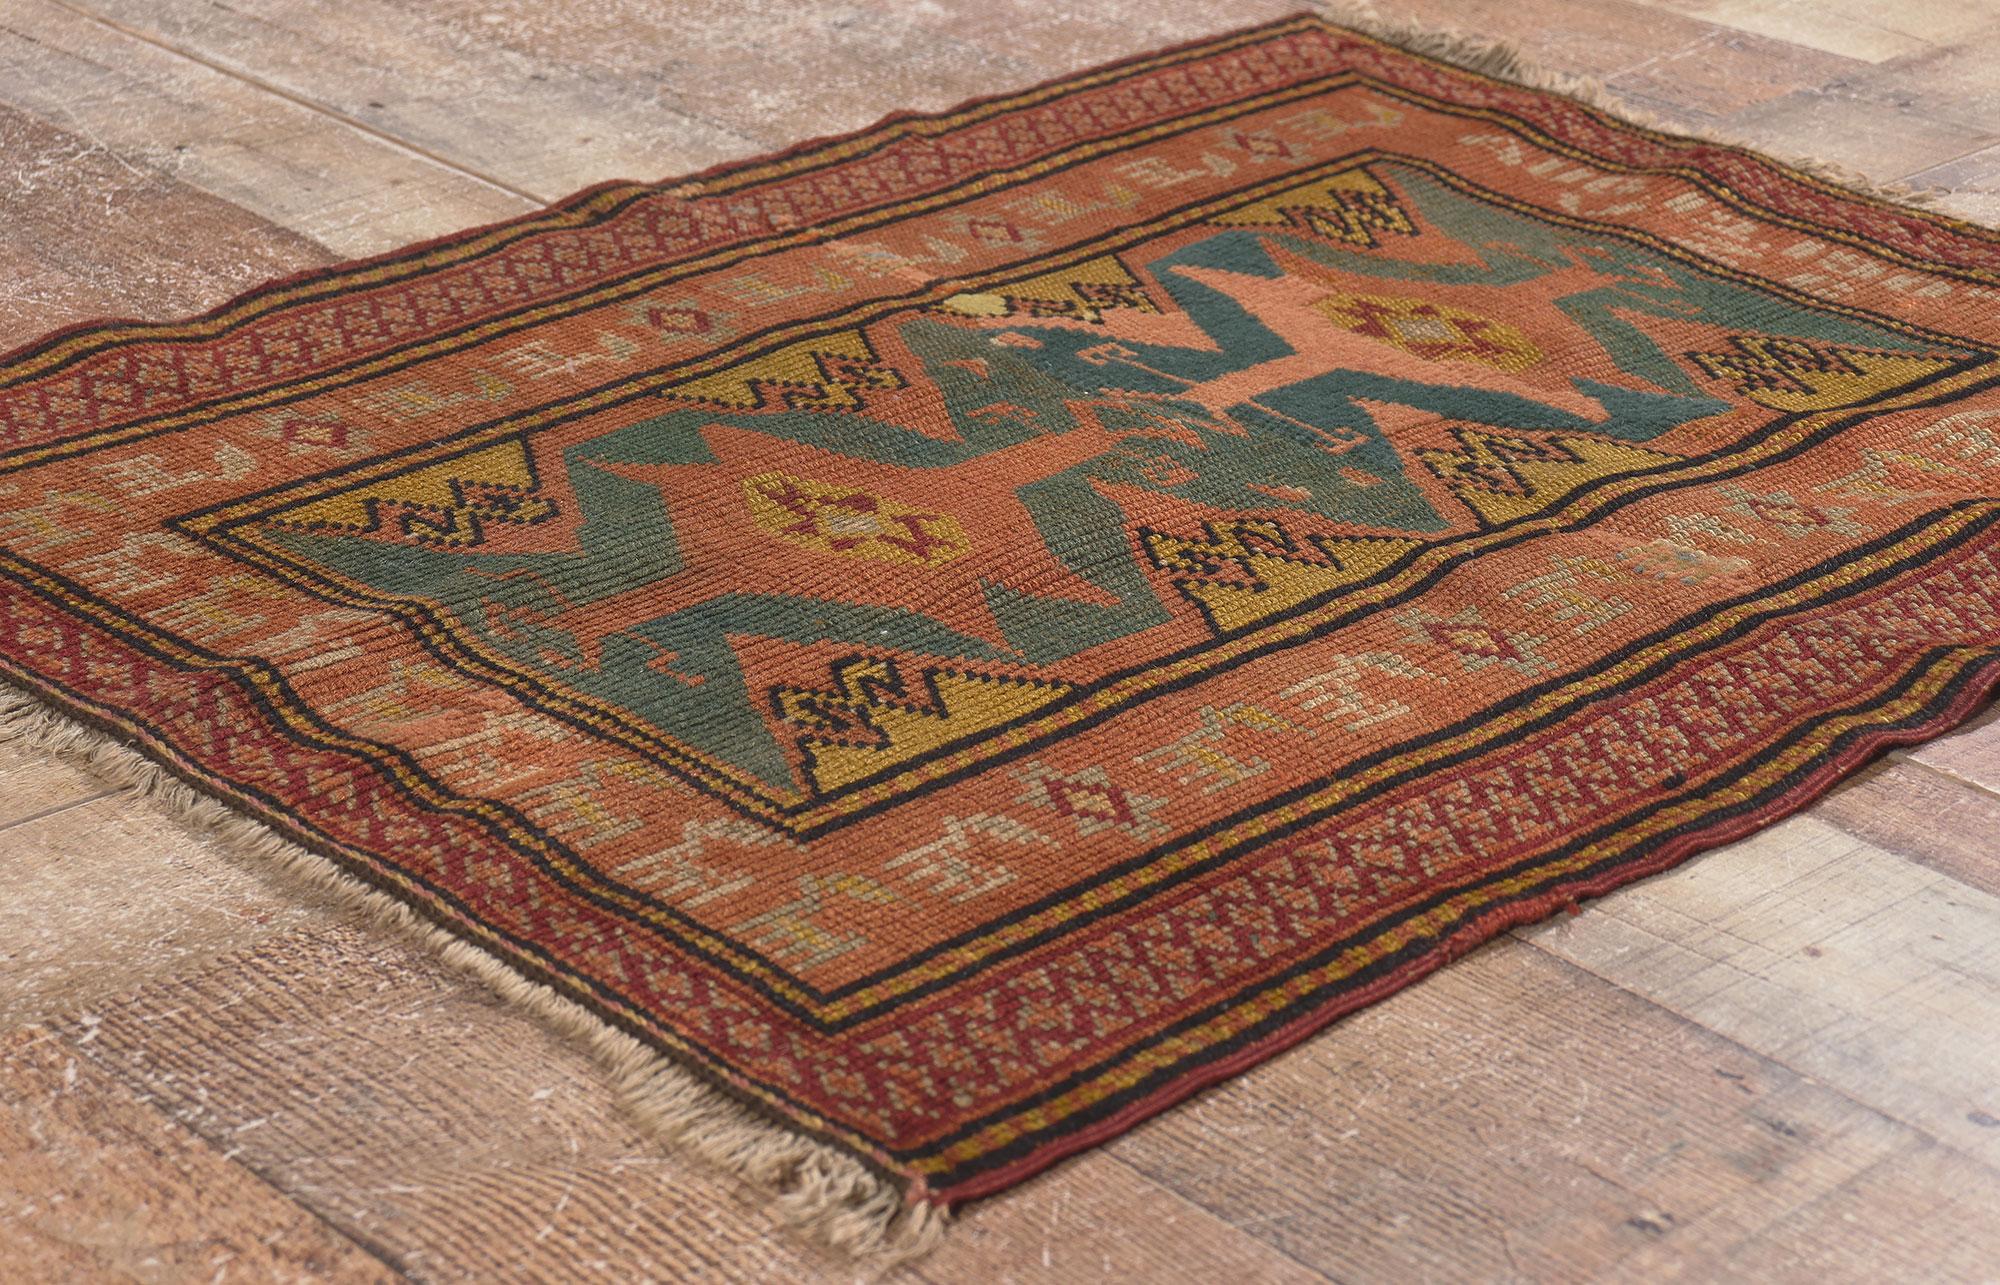 78698 Antique Turkish Oushak Rug, 02'02 x 02'07. ​This particular hand knotted wool antique Turkish Oushak rug, dated August 12, 1907, and initialed VZC, exemplifies the significance of signed and dated antique Turkish Oushak rugs, which often